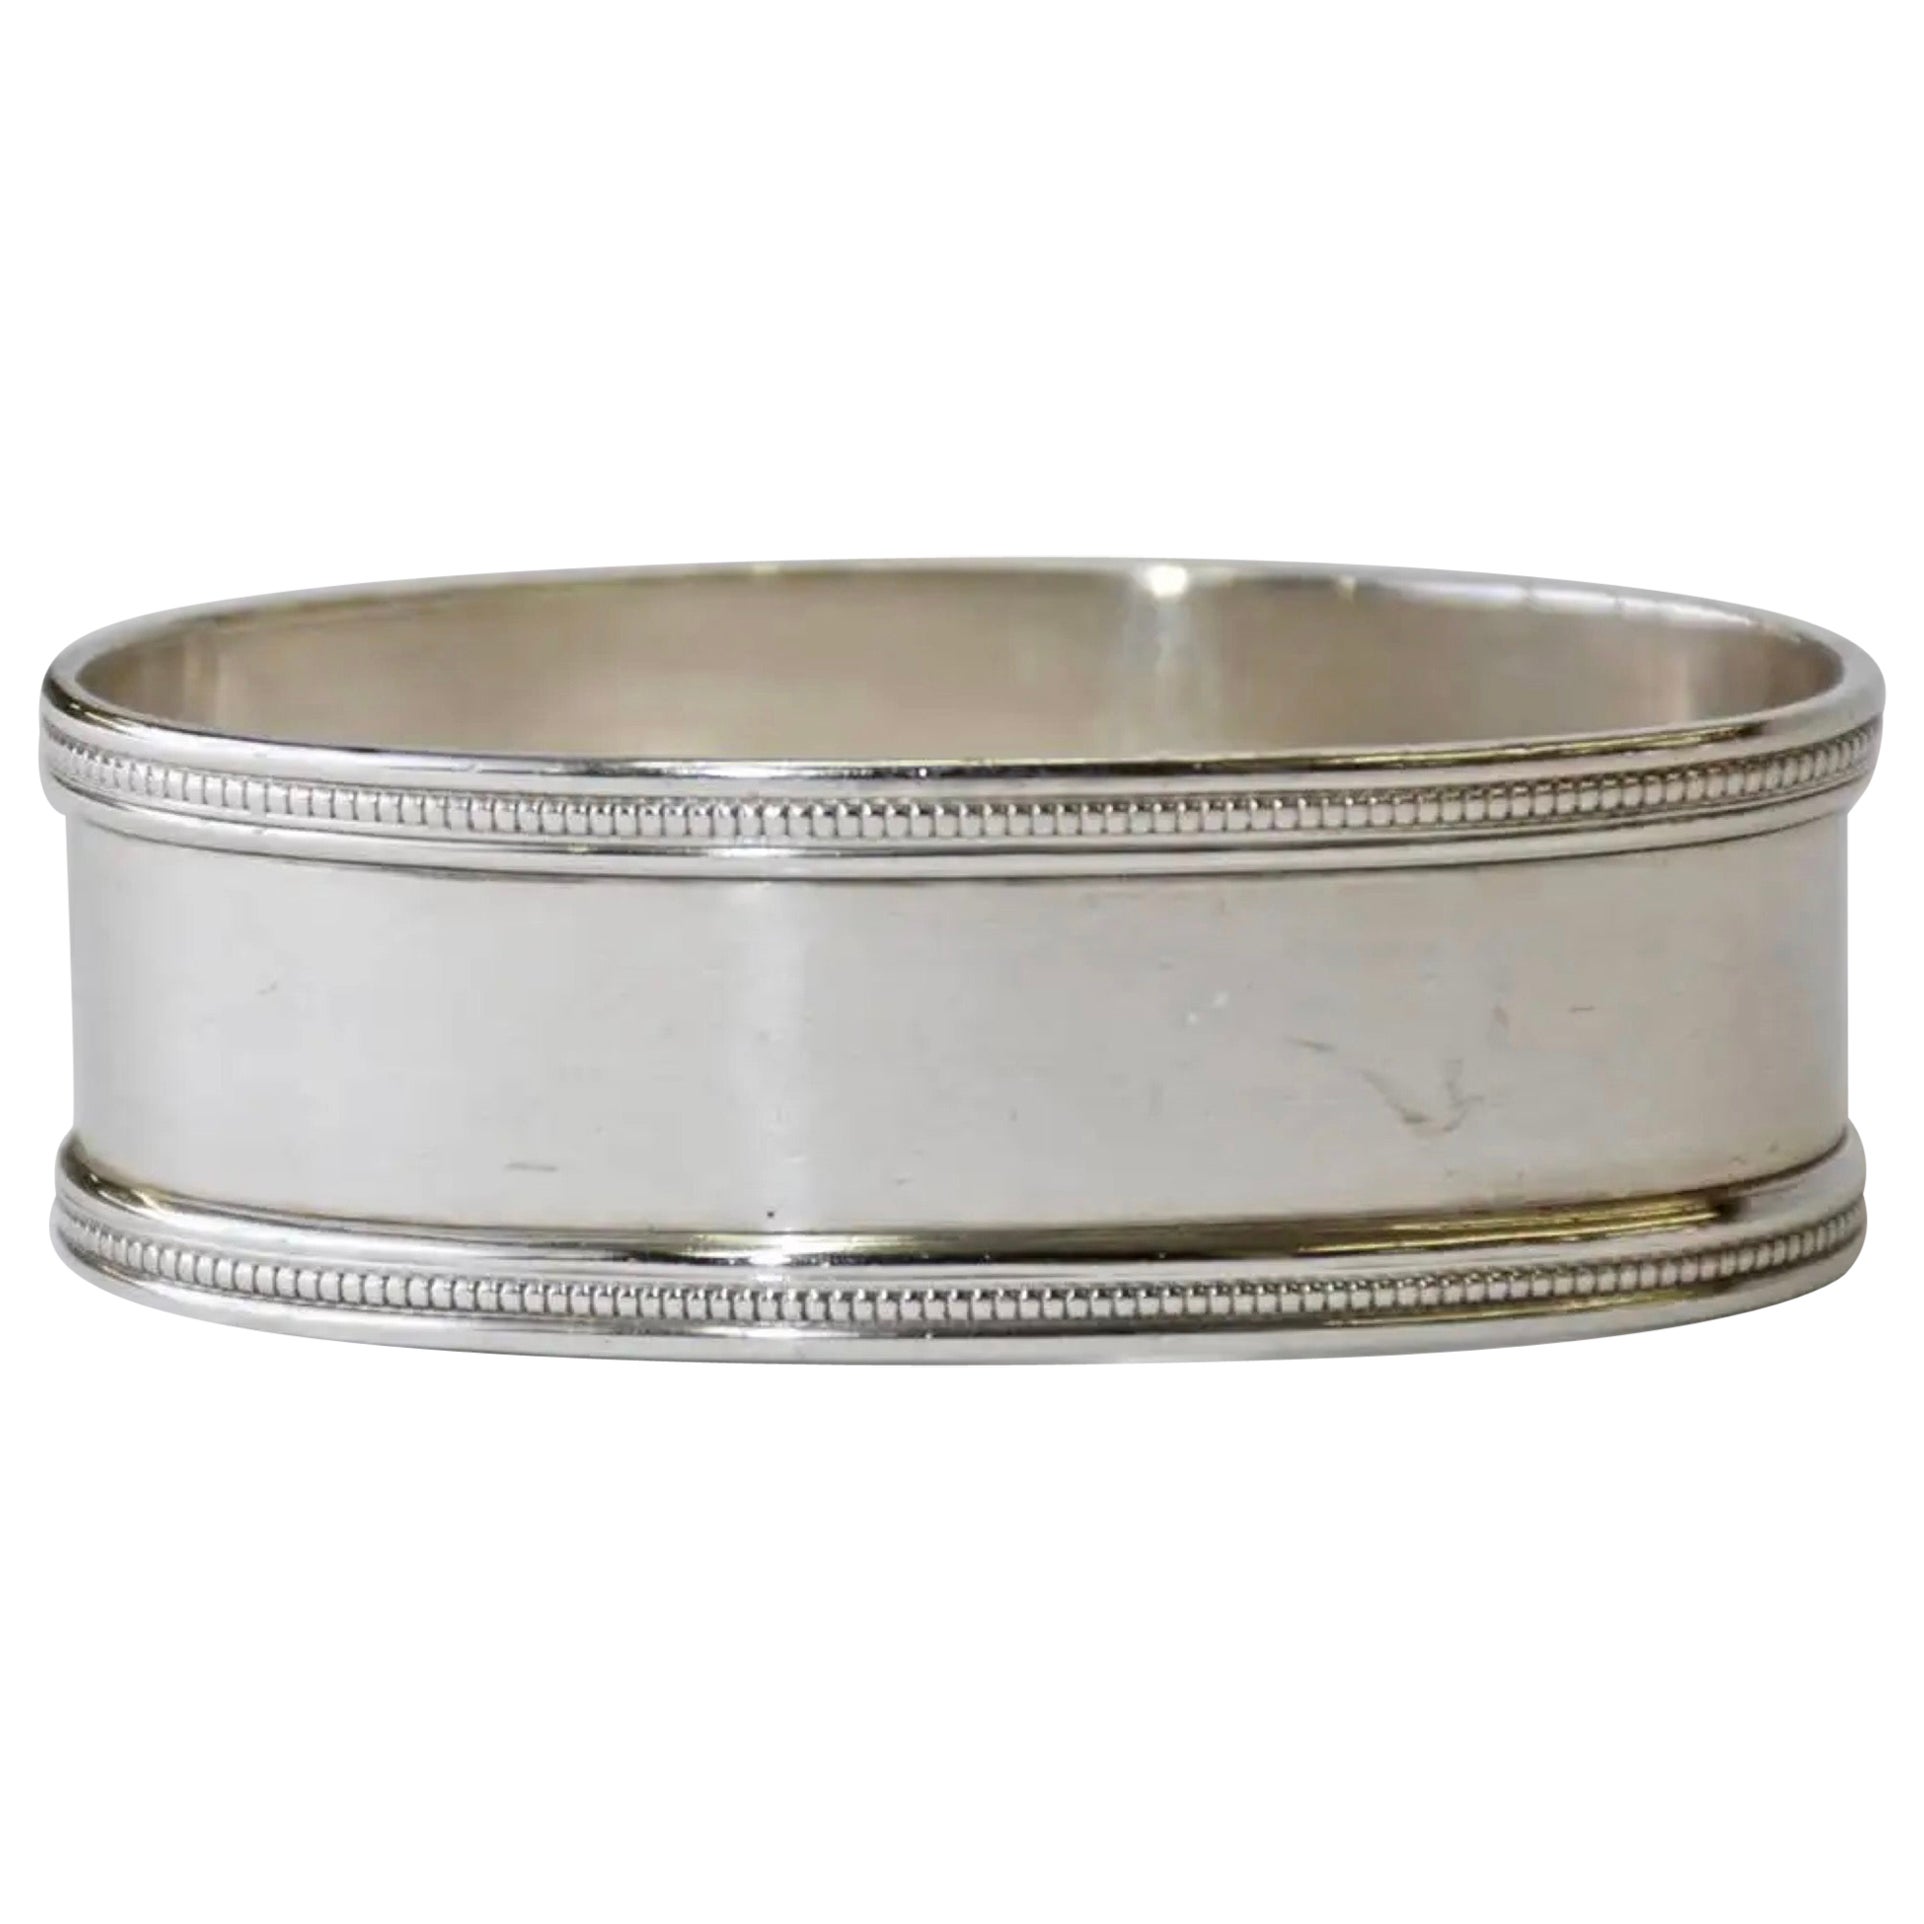 Classic Antique Oval Sterling Silver Napkin Ring +